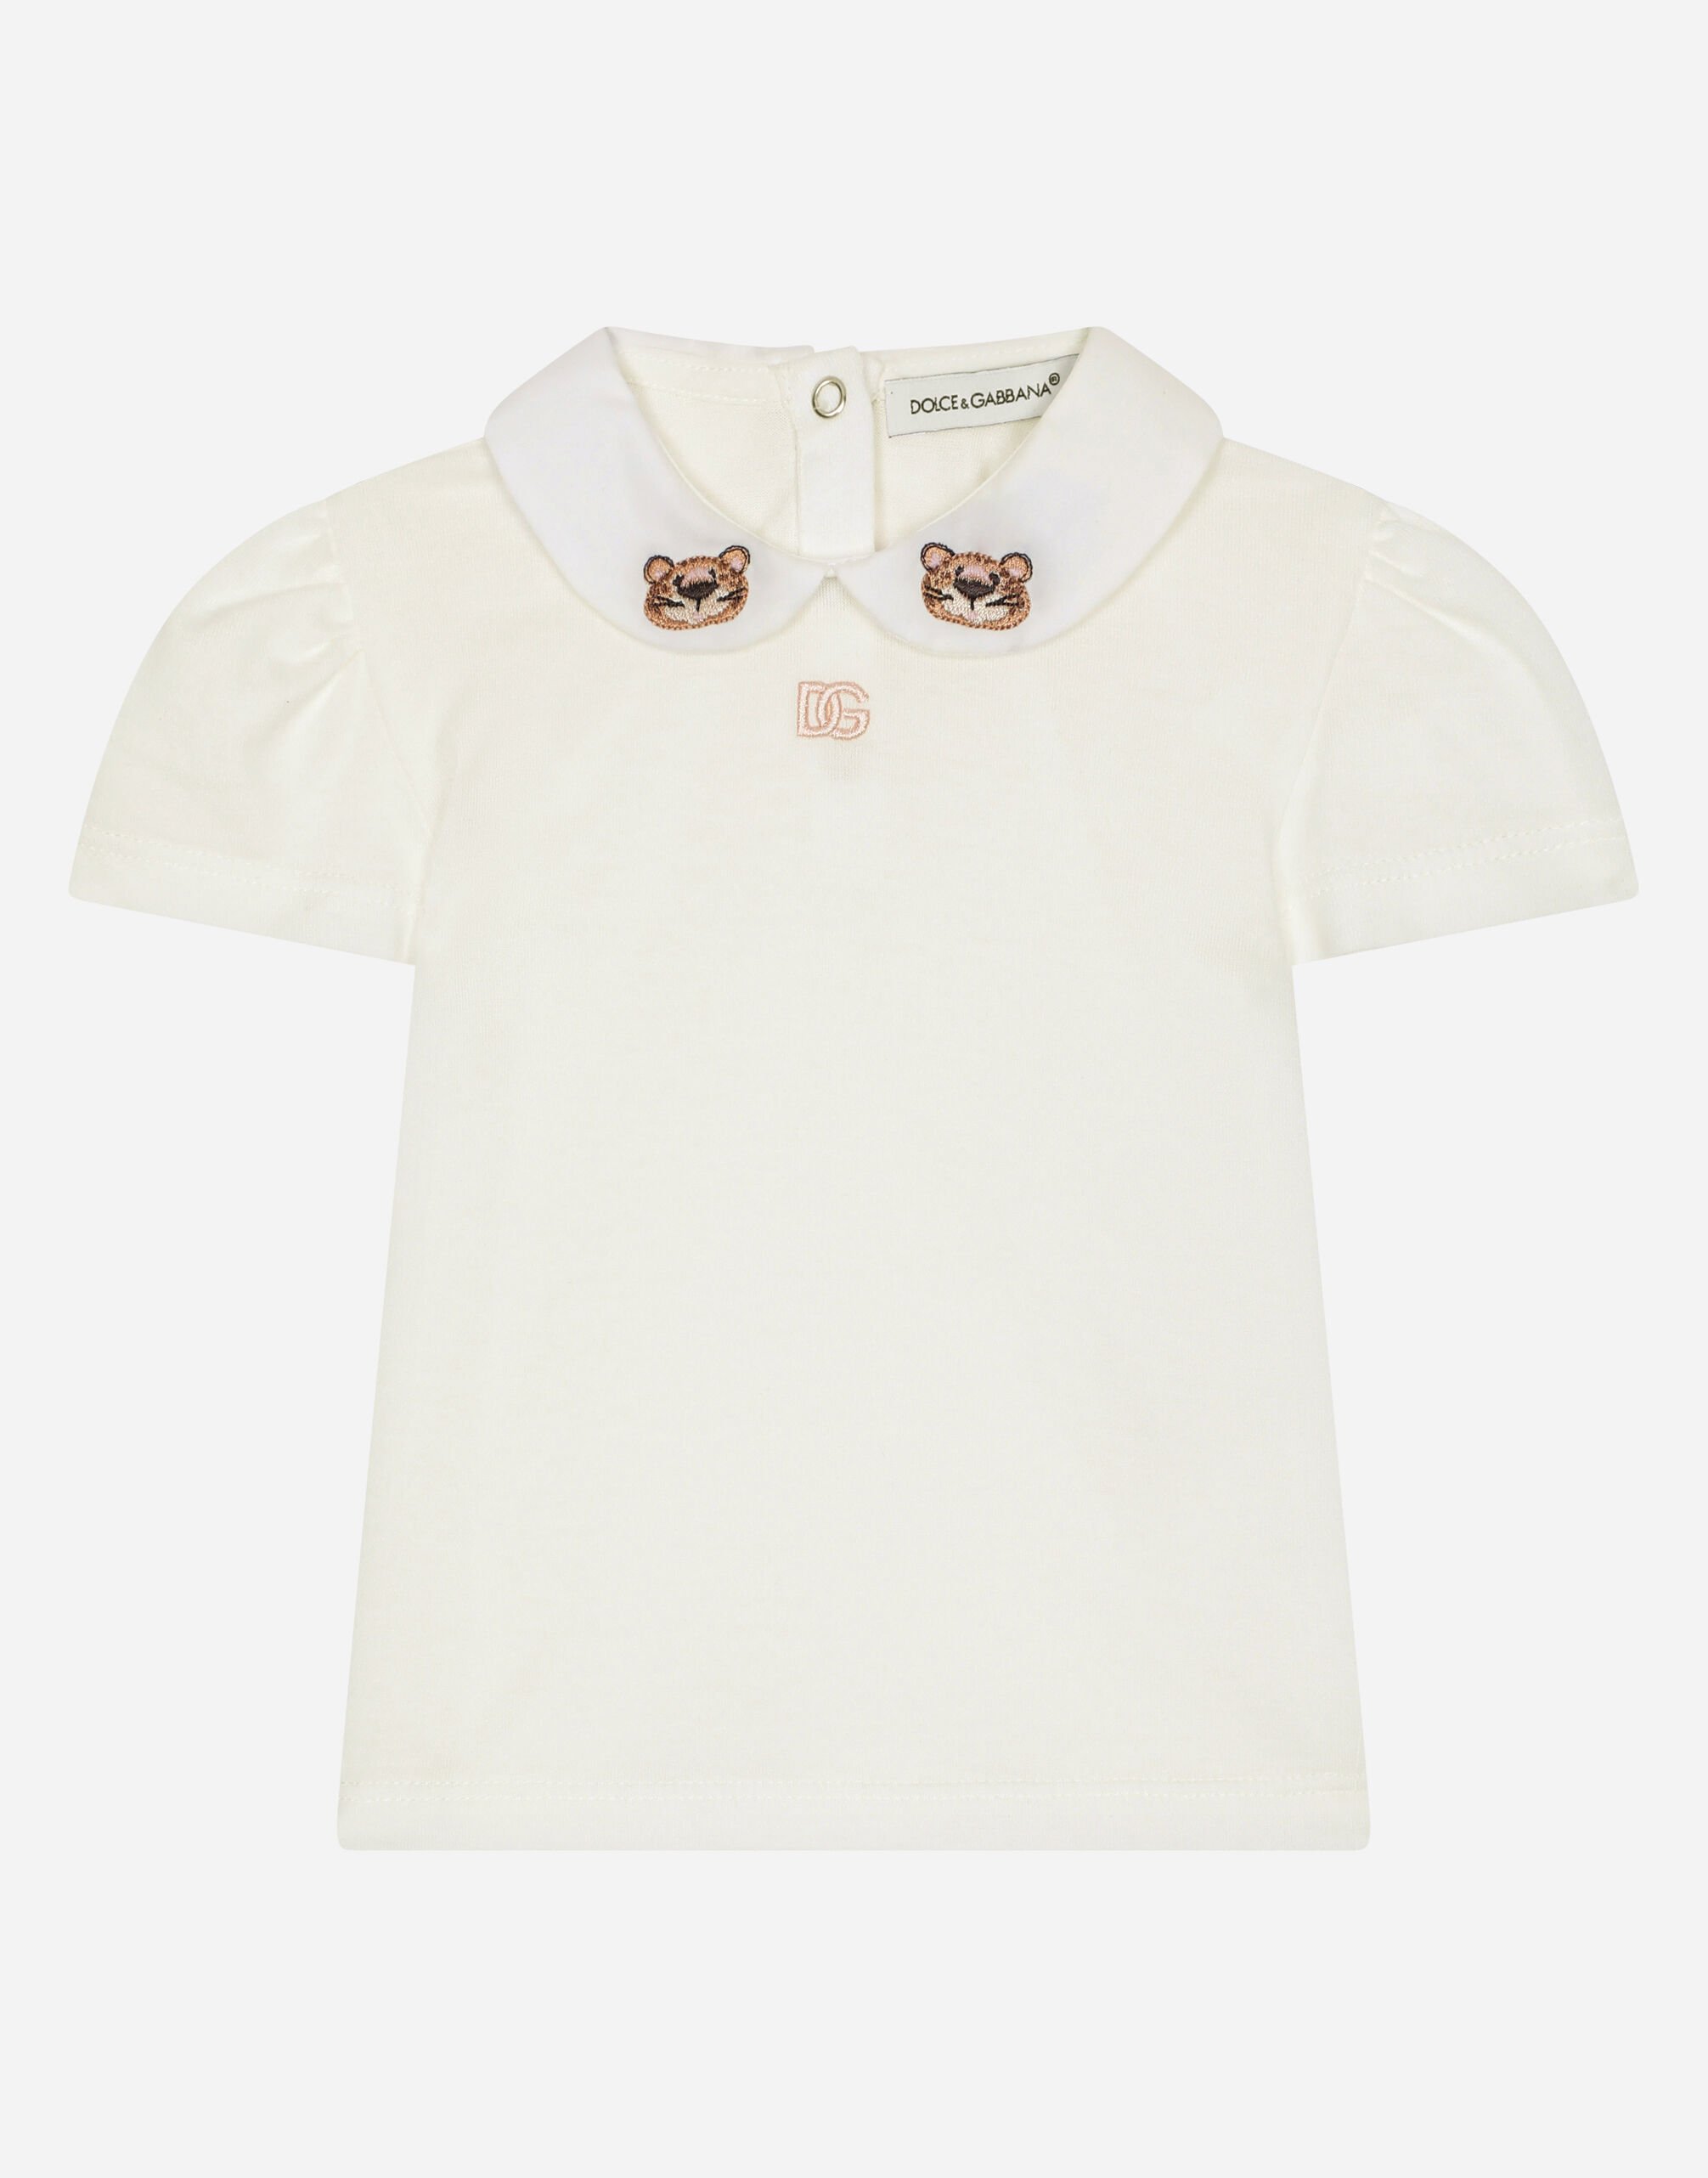 ${brand} Jersey T-shirt with baby leopard embroidery ${colorDescription} ${masterID}